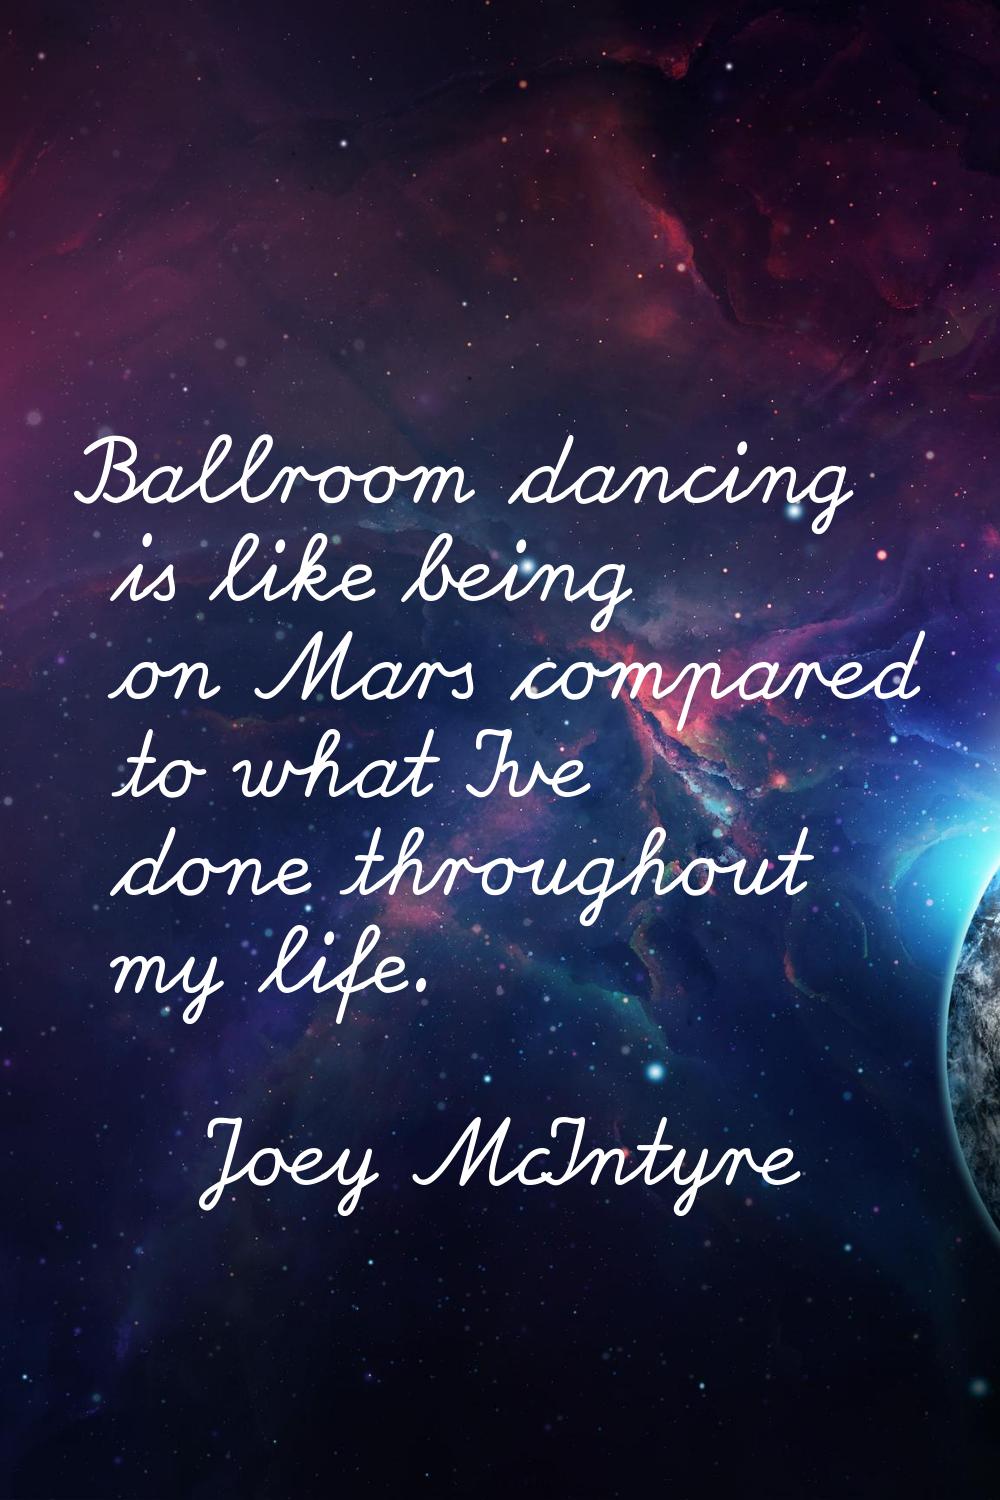 Ballroom dancing is like being on Mars compared to what I've done throughout my life.